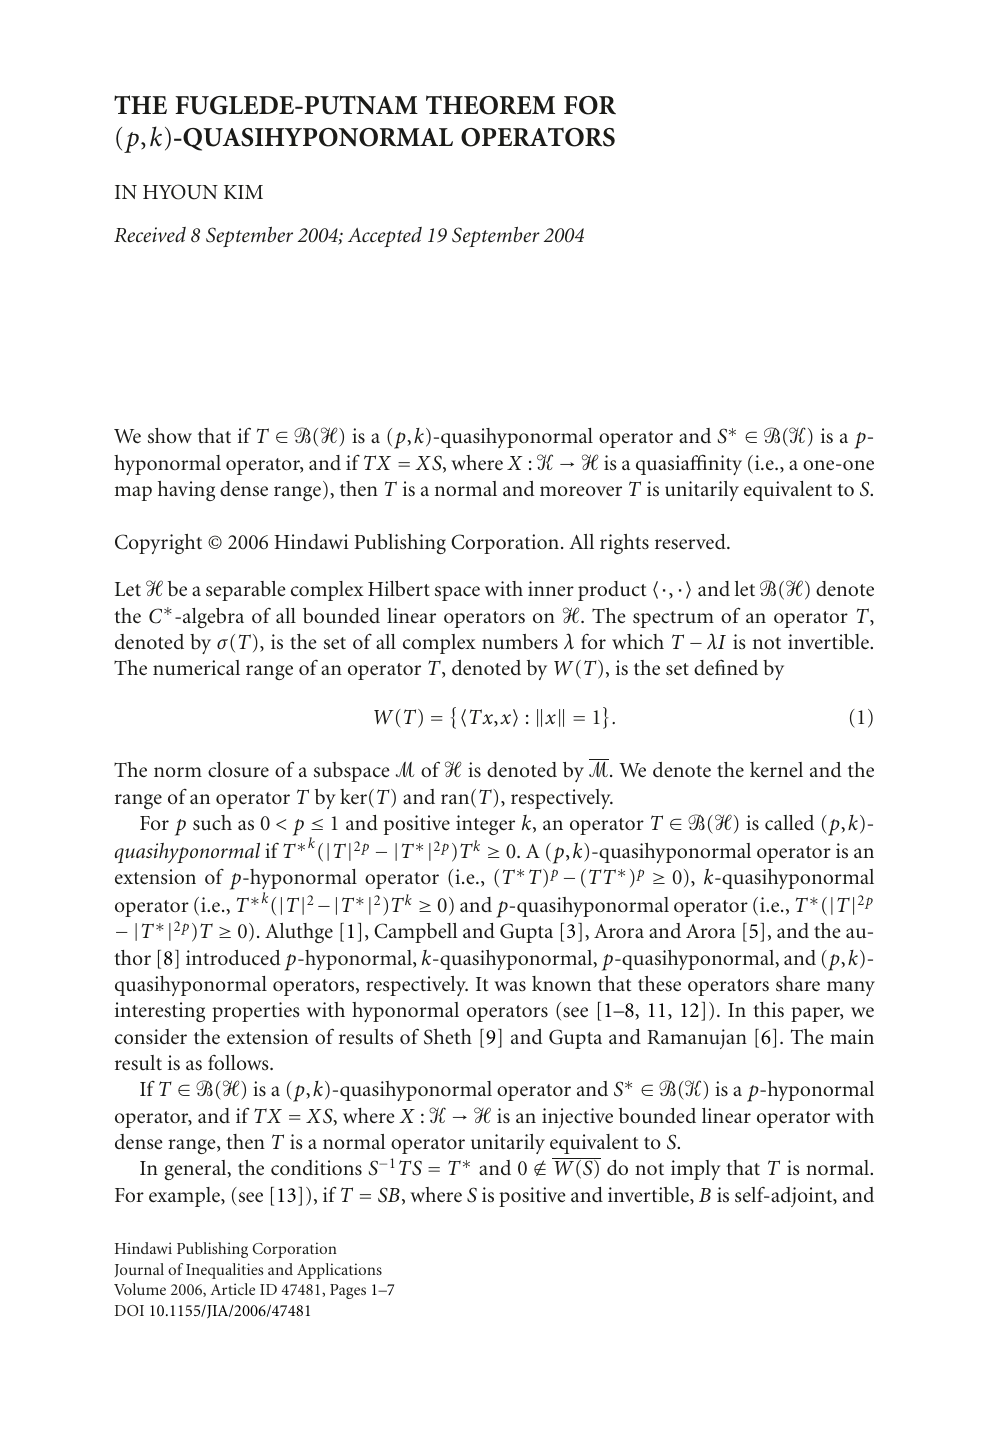 The Fuglede Putnam Theorem For P K Quasihyponormal Operators Topic Of Research Paper In Mathematics Download Scholarly Article Pdf And Read For Free On Cyberleninka Open Science Hub